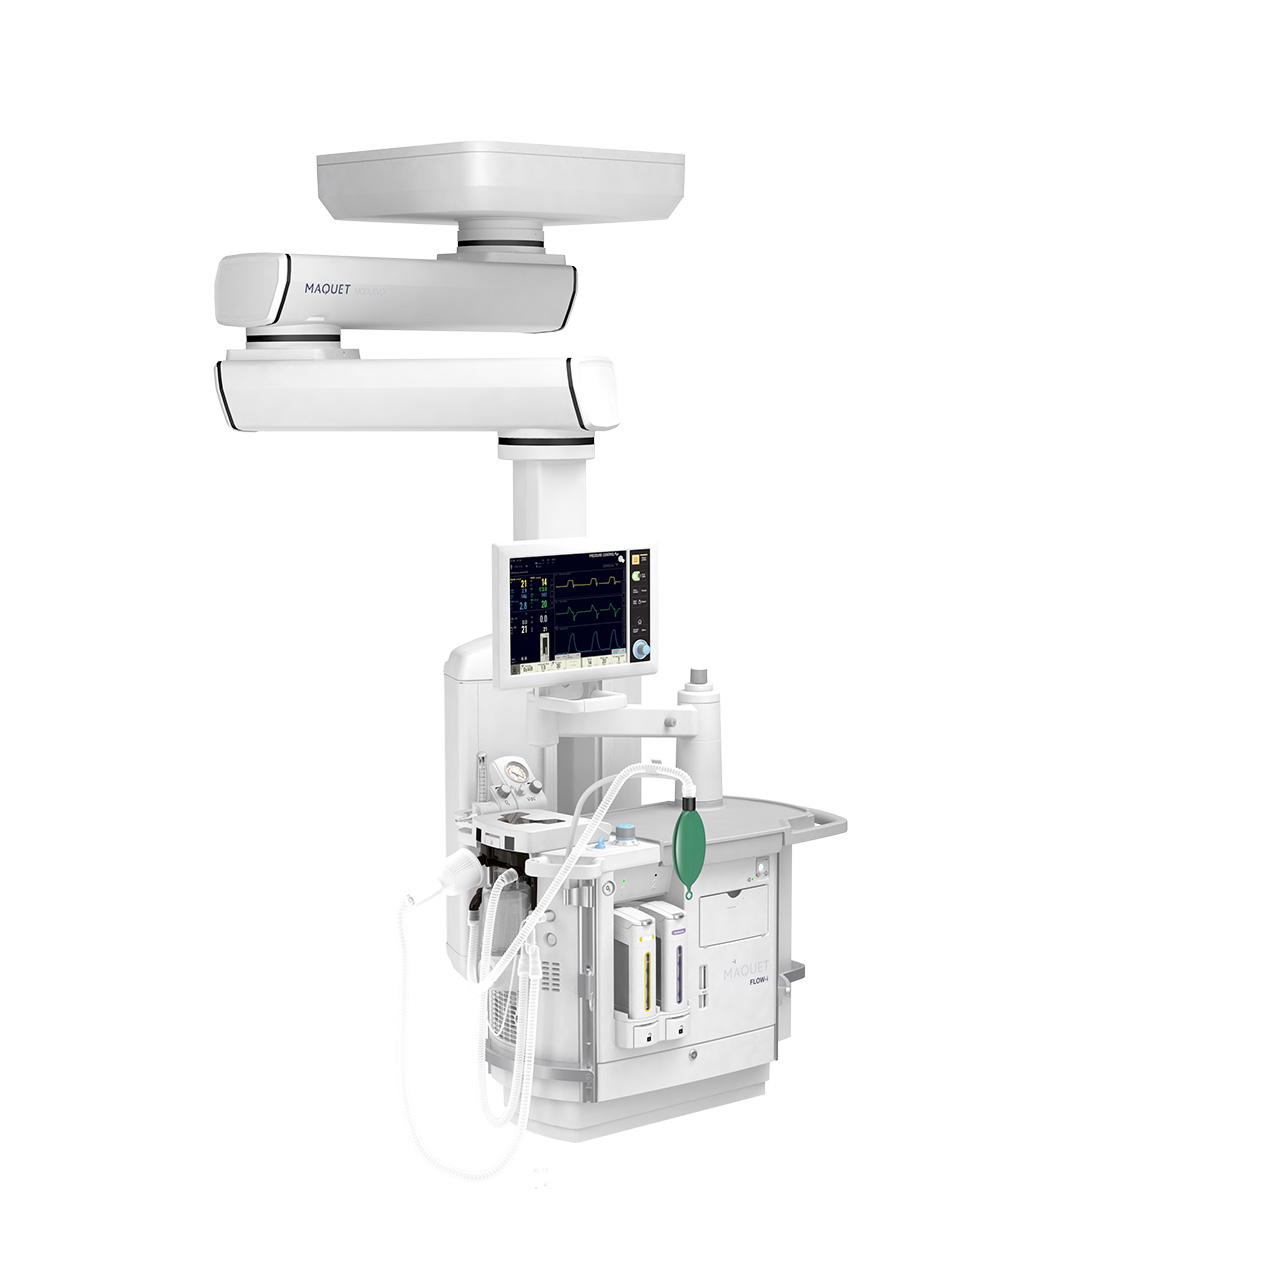 Getinge’s highly advanced and ceiling mounted Flow-i anesthesia machine is especially suitable for the Hybrid OR.